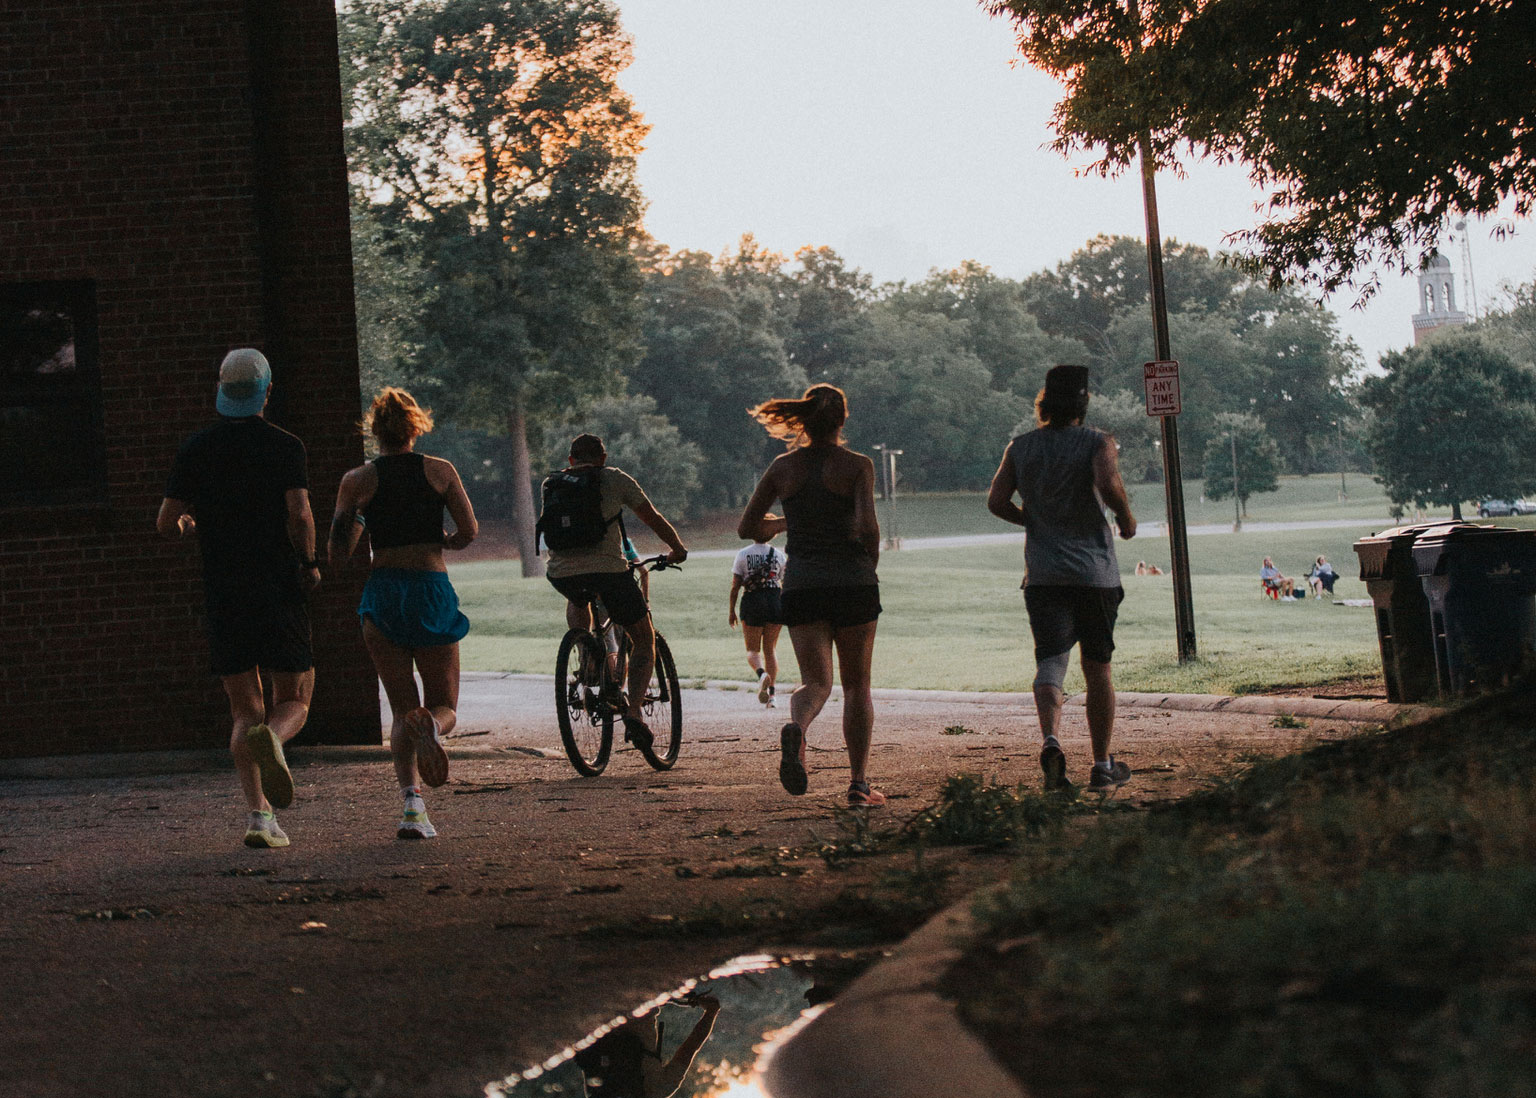 Runners and cyclist in a park